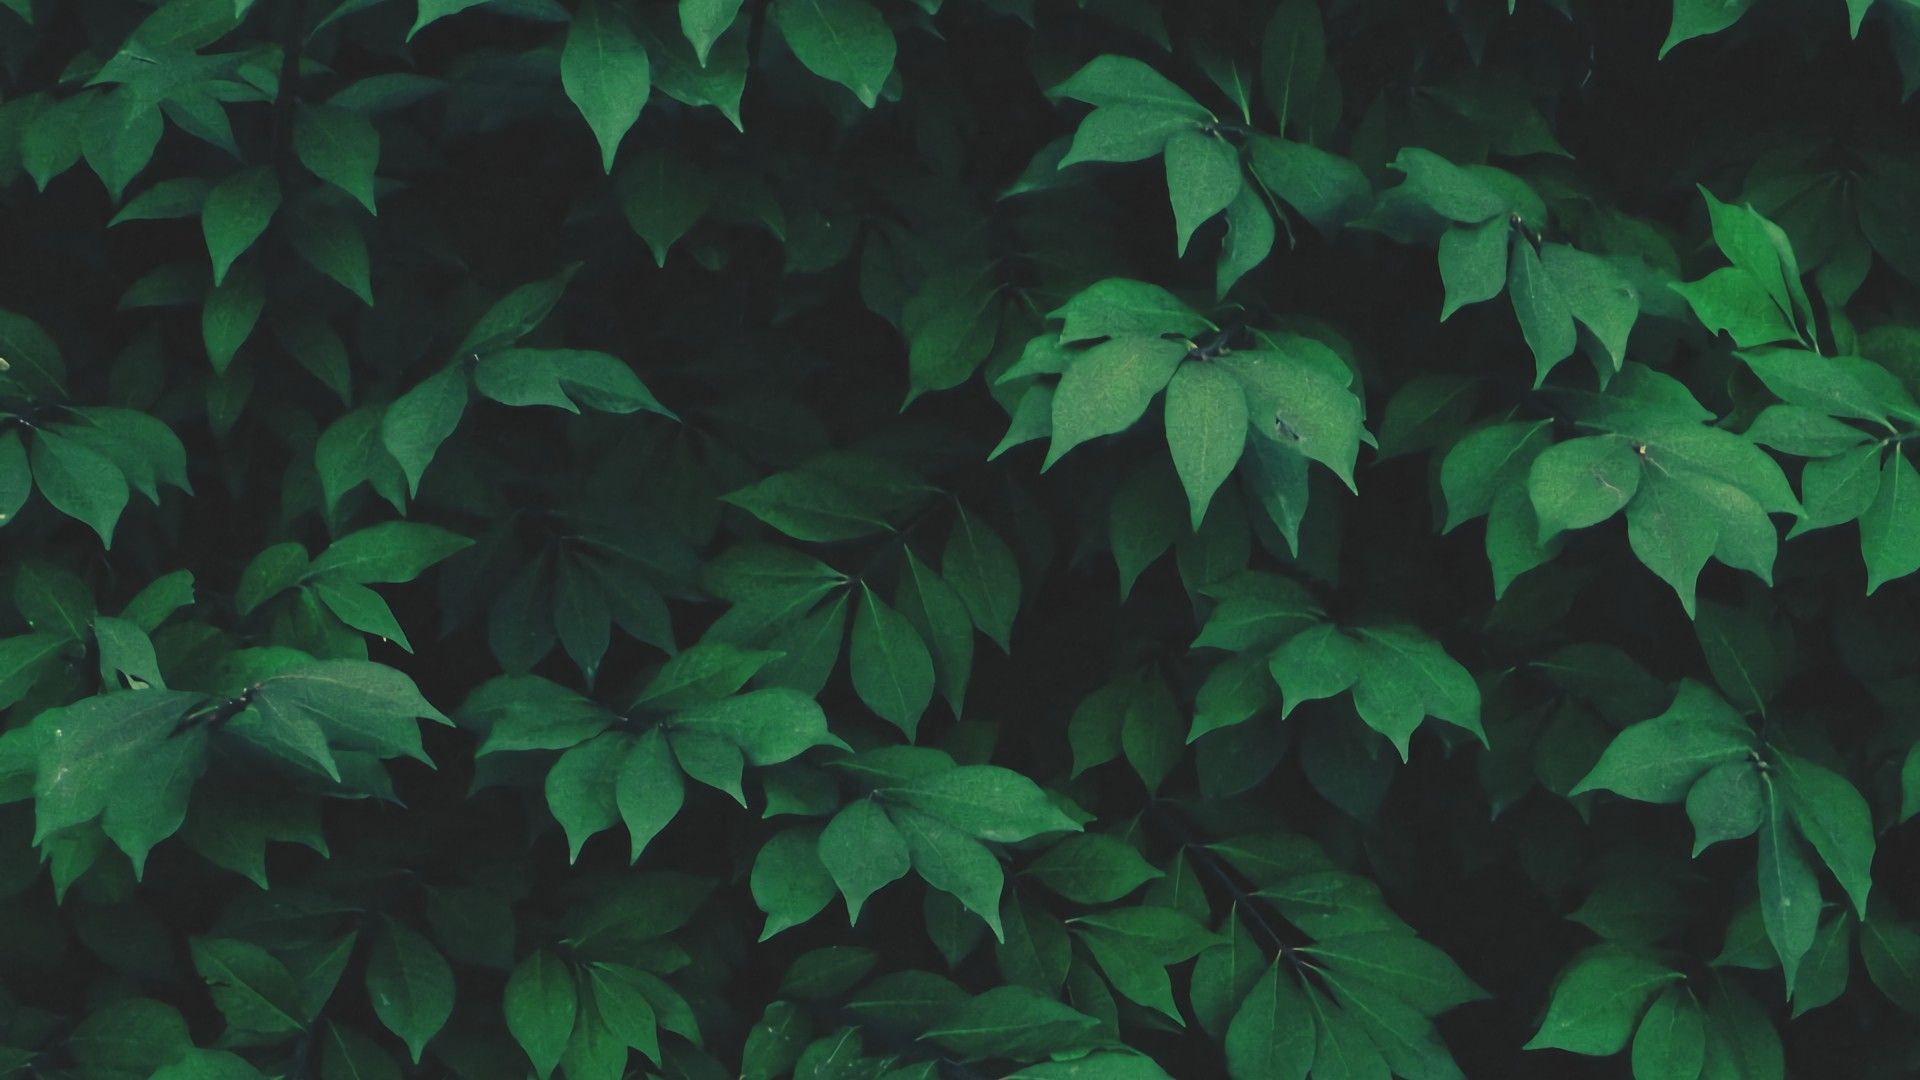 A wall of green leaves - Dark green